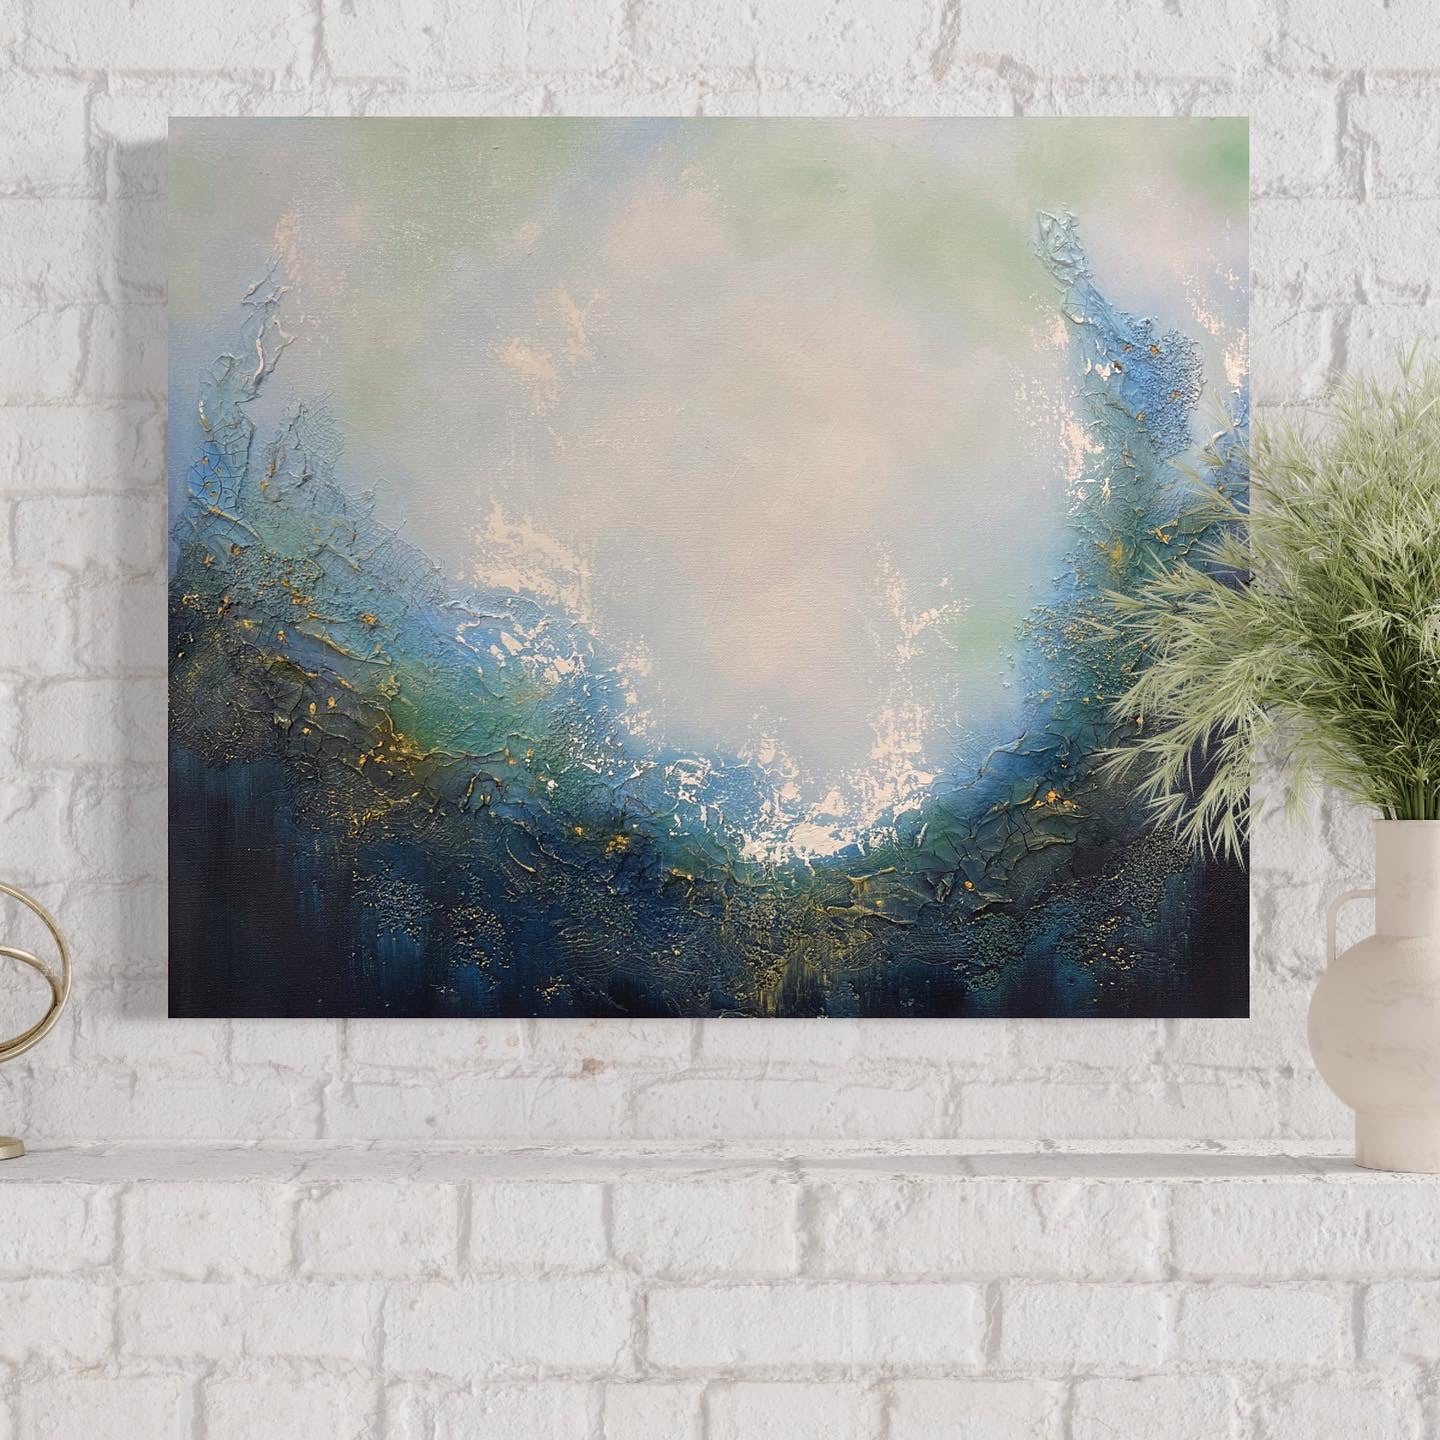 This stunning original abstract painting evokes a feeling of soulful peace and beckons a return to your spiritual center. Dive in and explore this portal which invites personal reflection with its powerful imagery of a magical portal opening up to a realm of endless possibilities. Painting hangs on the mantle of a white brick fireplace.